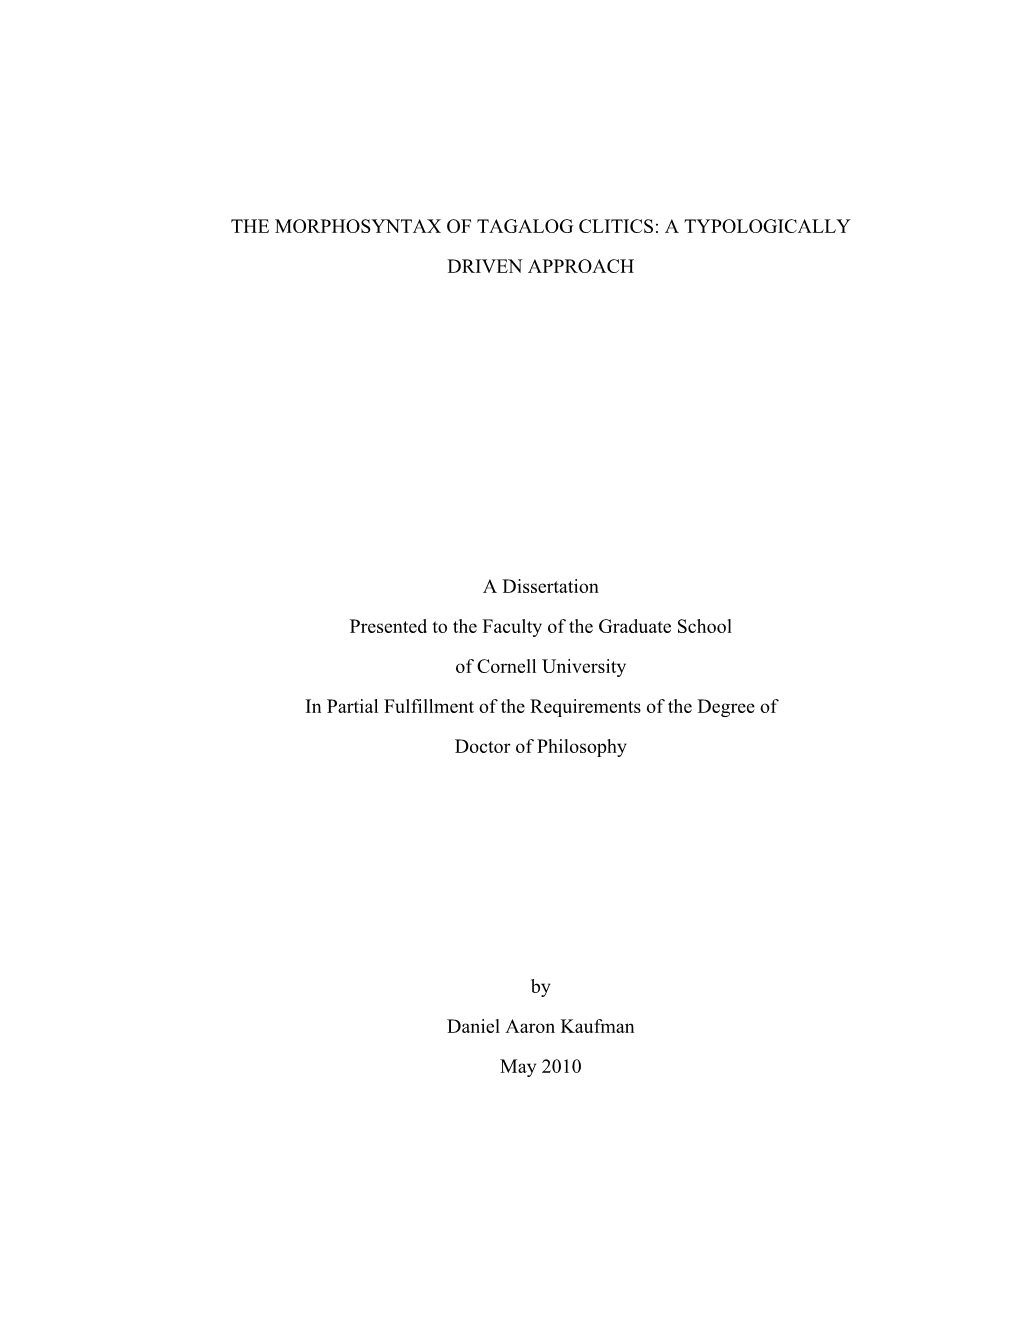 The Morphosyntax of Tagalog Clitics: a Typologically Driven Approach